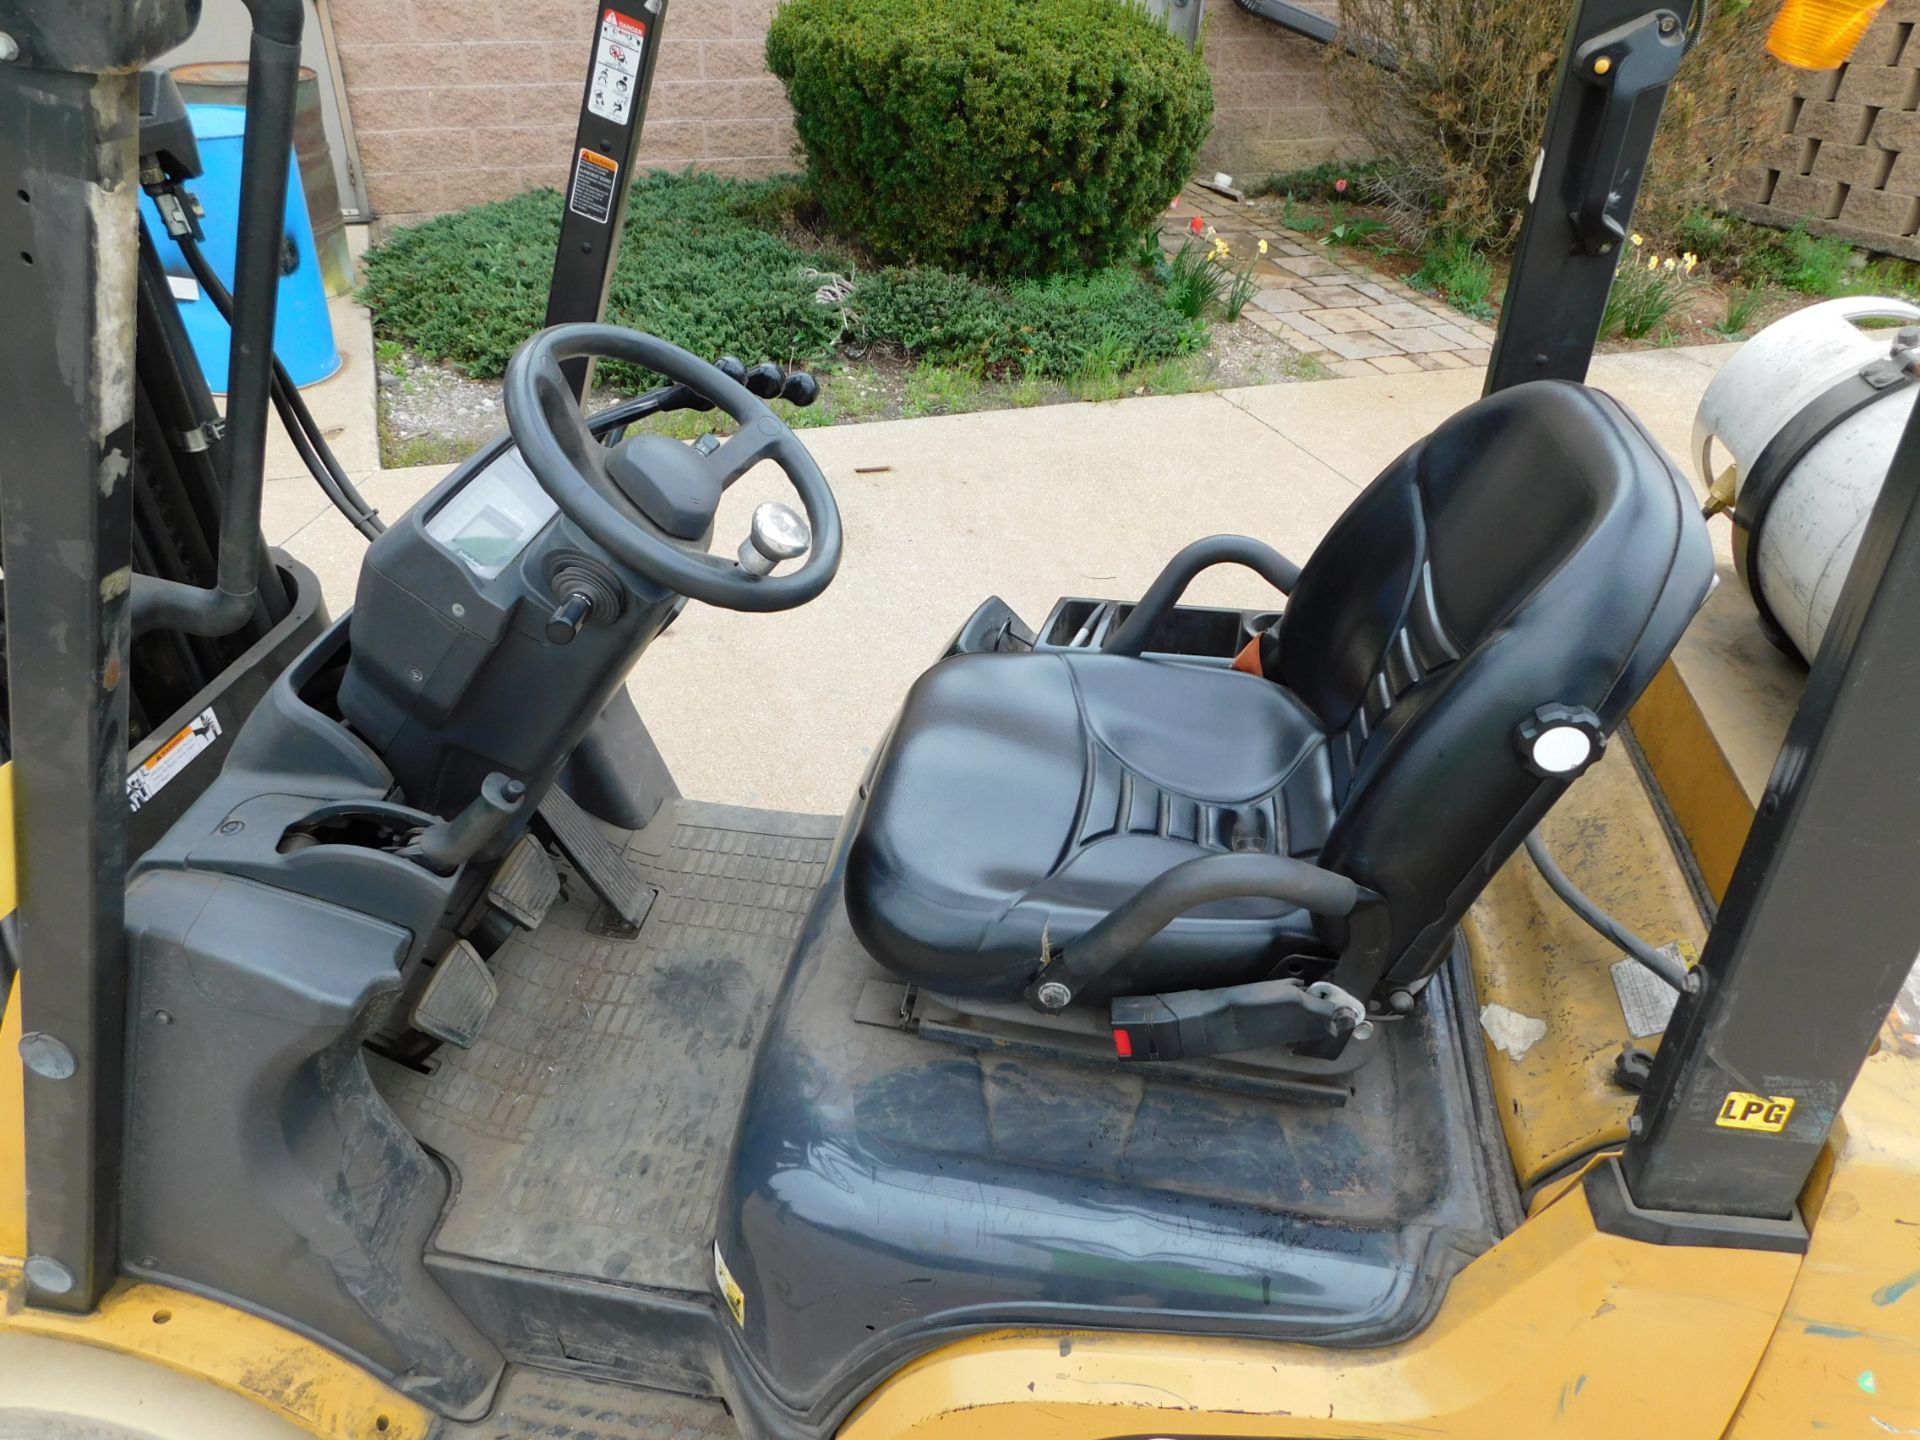 Caterpillar Model 2C6000 Forklift, SN AT83F40876, 4,500 lb cap., LP, Non-Marking Hard Tires, 3-Stage - Image 10 of 21